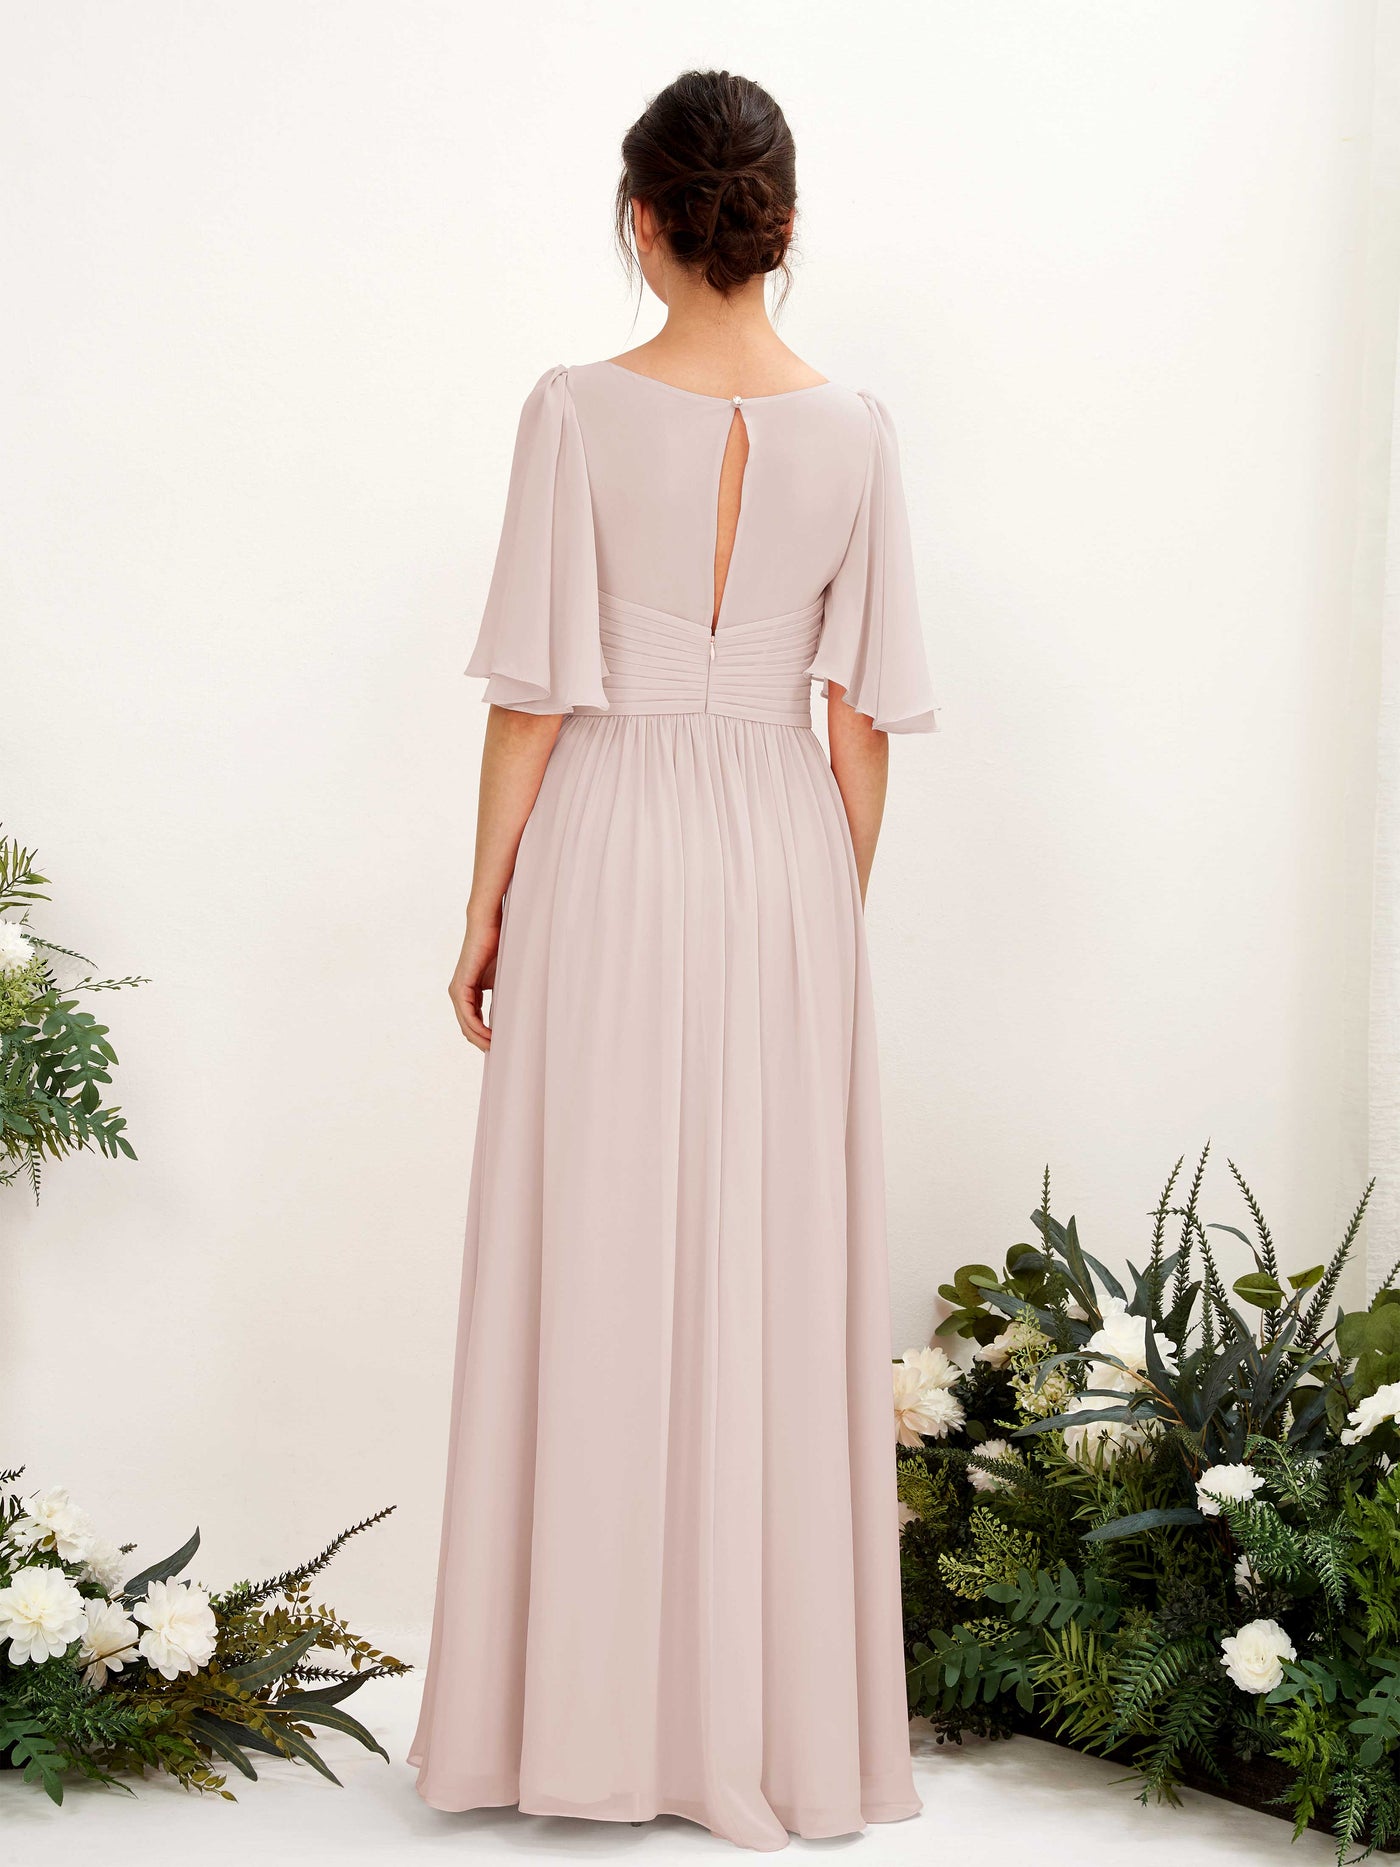 Biscotti Bridesmaid Dresses Bridesmaid Dress A-line Chiffon V-neck Full Length 1/2 Sleeves Wedding Party Dress (81221635)#color_biscotti